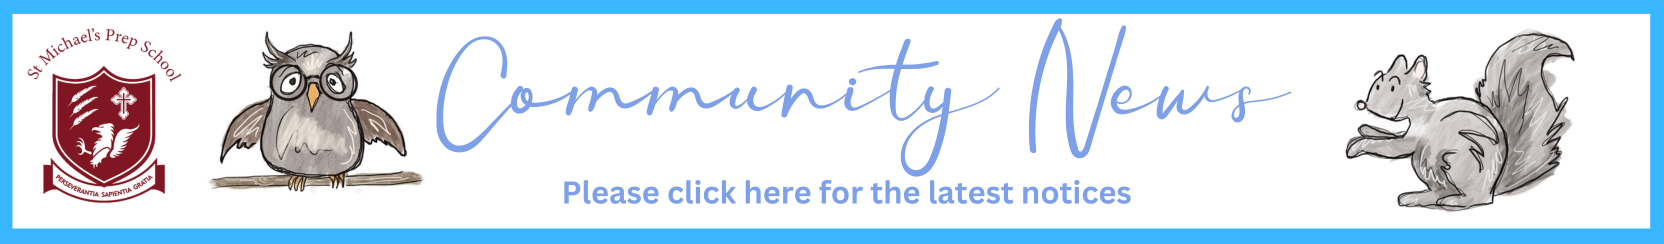 Community News notices banner